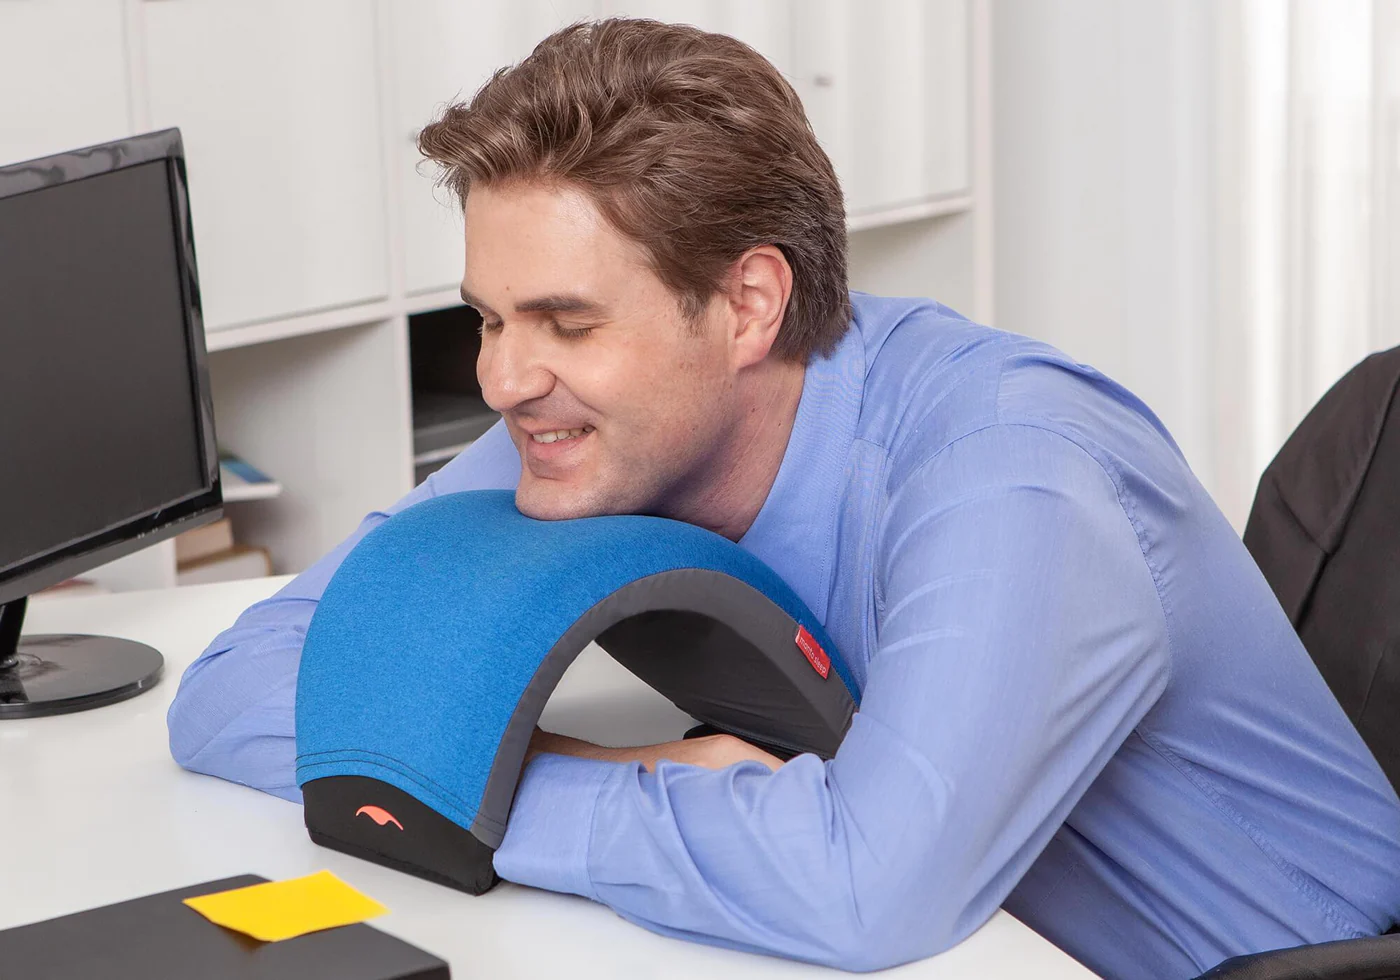 A man napping on his work desk, using a nap pillow with an arc design.